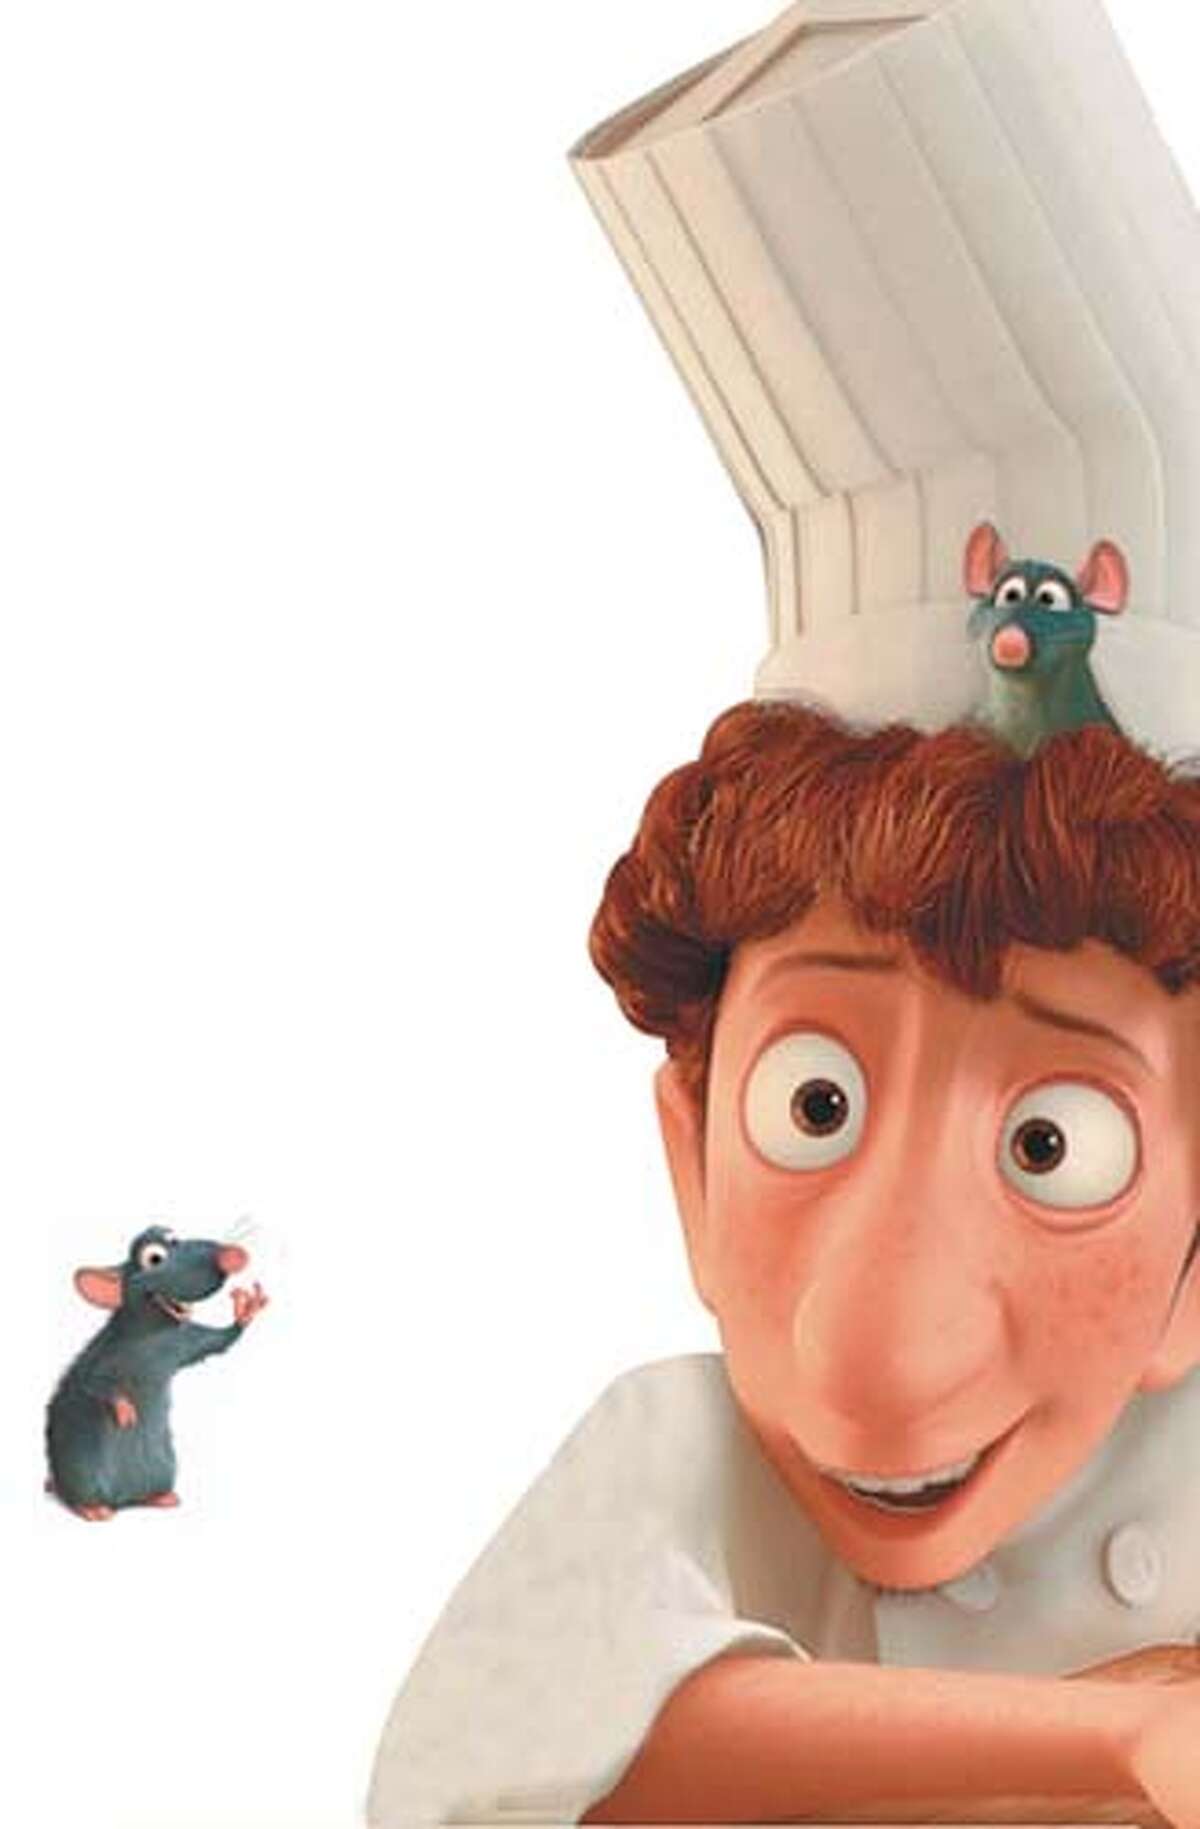 For its new film "Ratatouille," Pixar explored our obsession with cuisine.